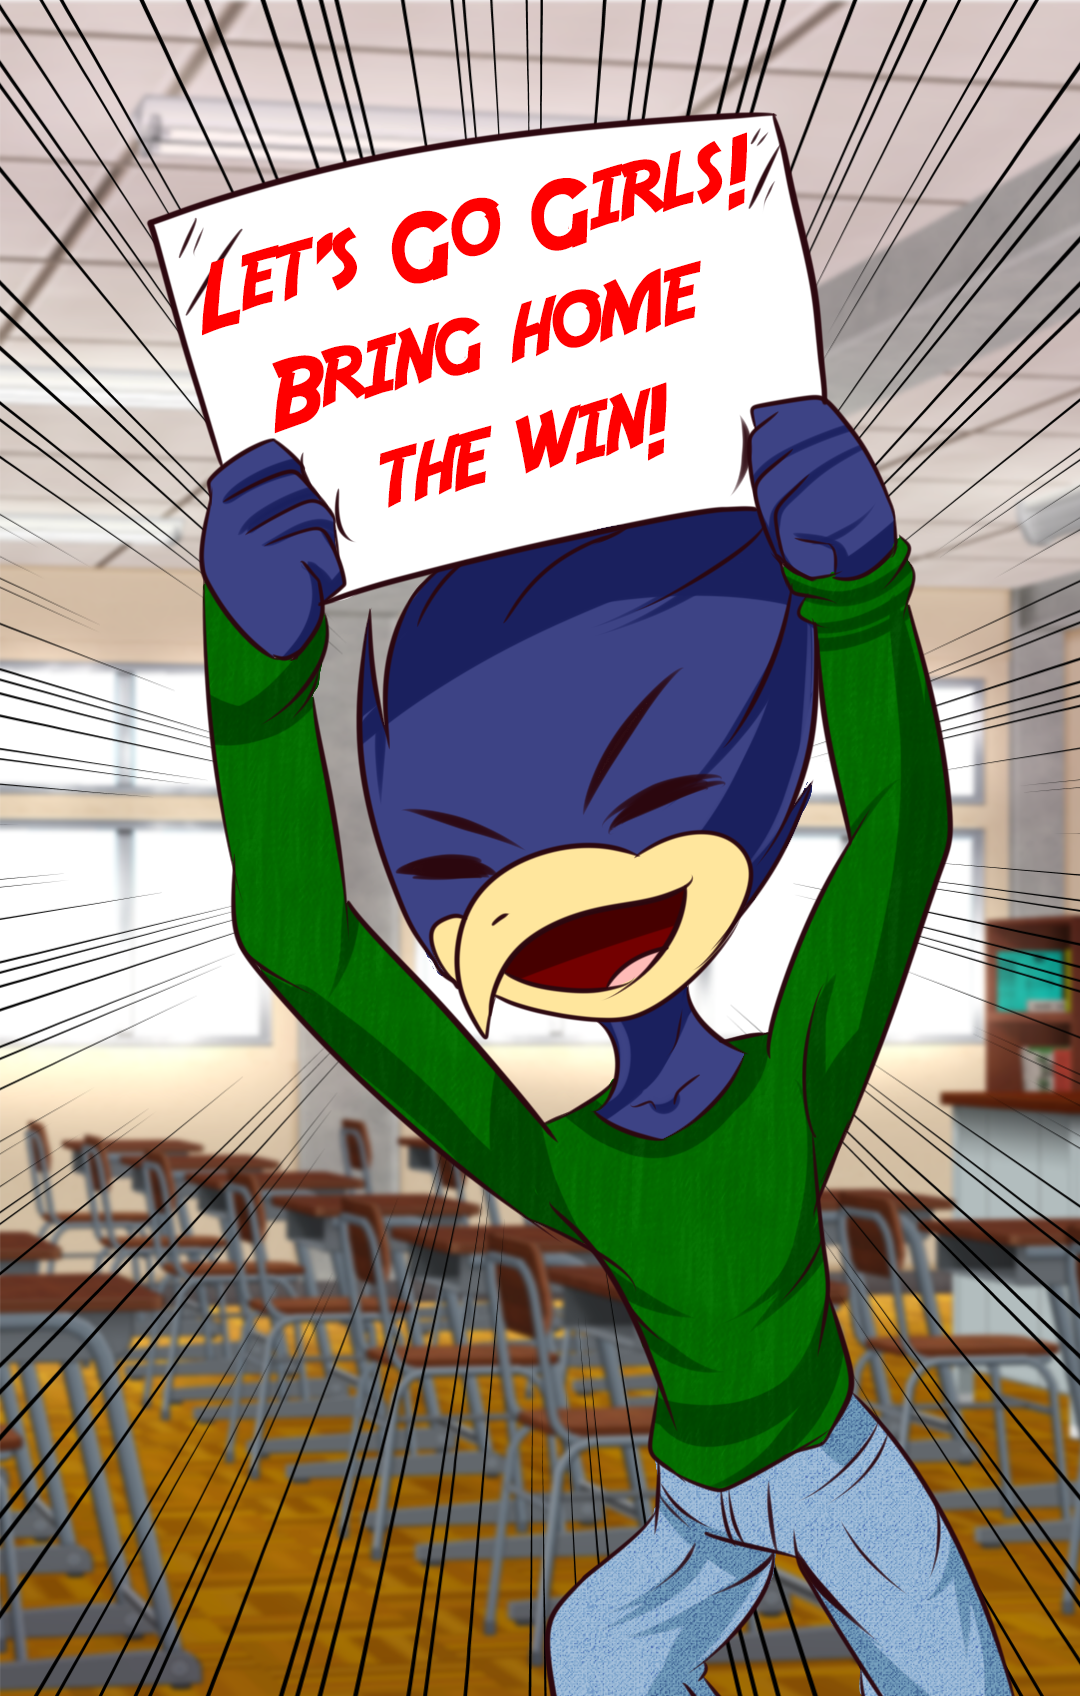 Illustration of HFC Hawkster in classroom holding a sign that reads "Let's Go Girls! Bring Home the Win!"